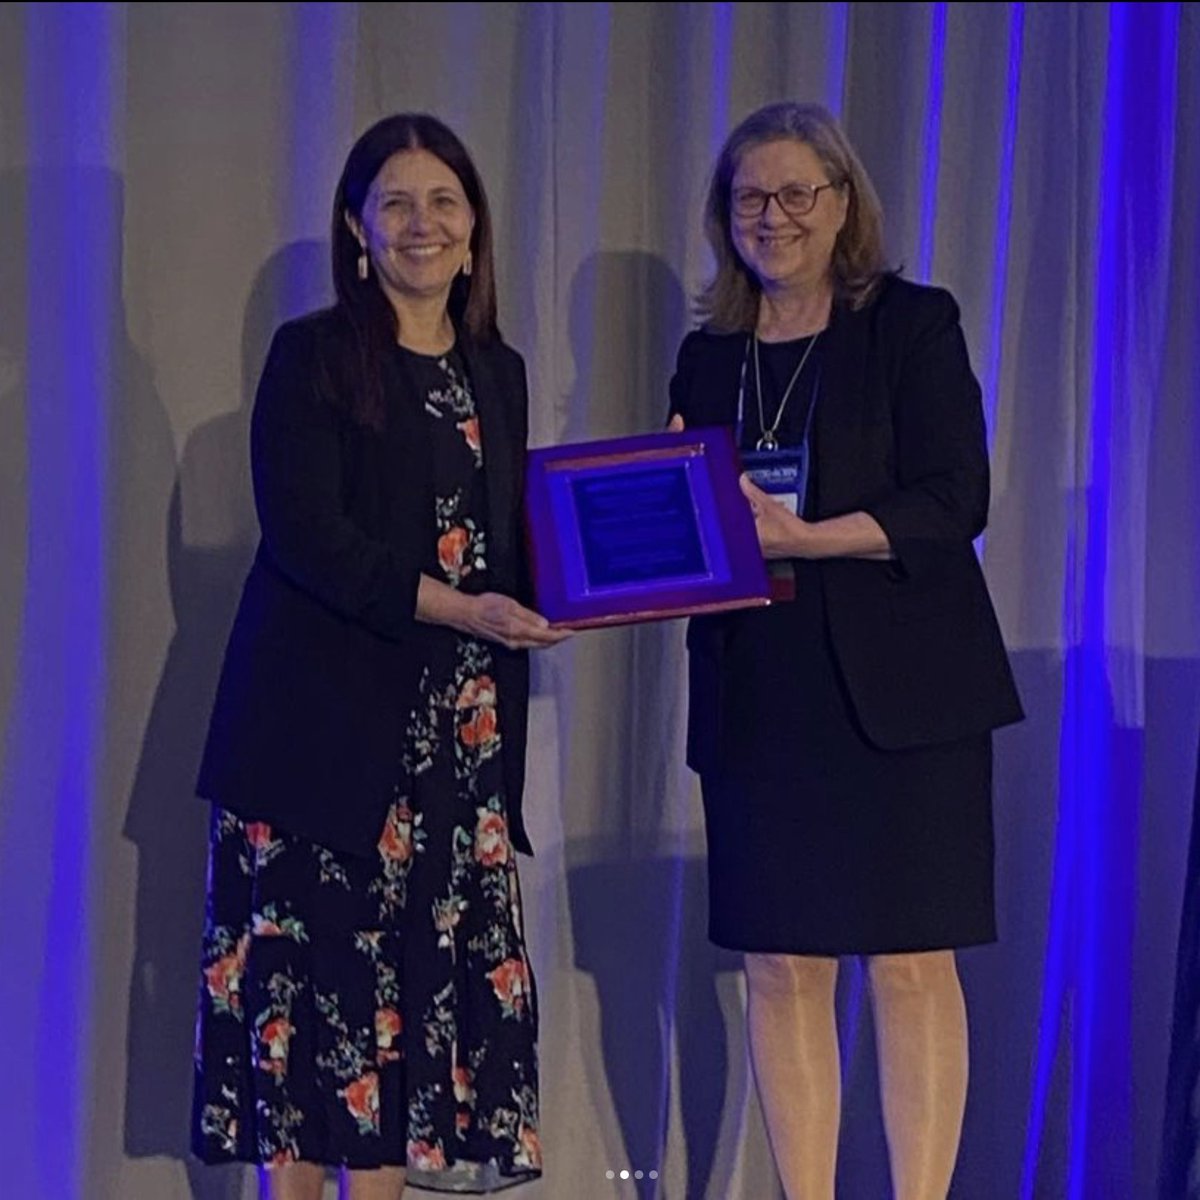 Congratulations to SCI Deputy Director Heather Wakelee on receiving the @eaonc Remarkable Mentor to #WomenInOncology Award. Well deserved! @HwakeleeMD #EAOnc